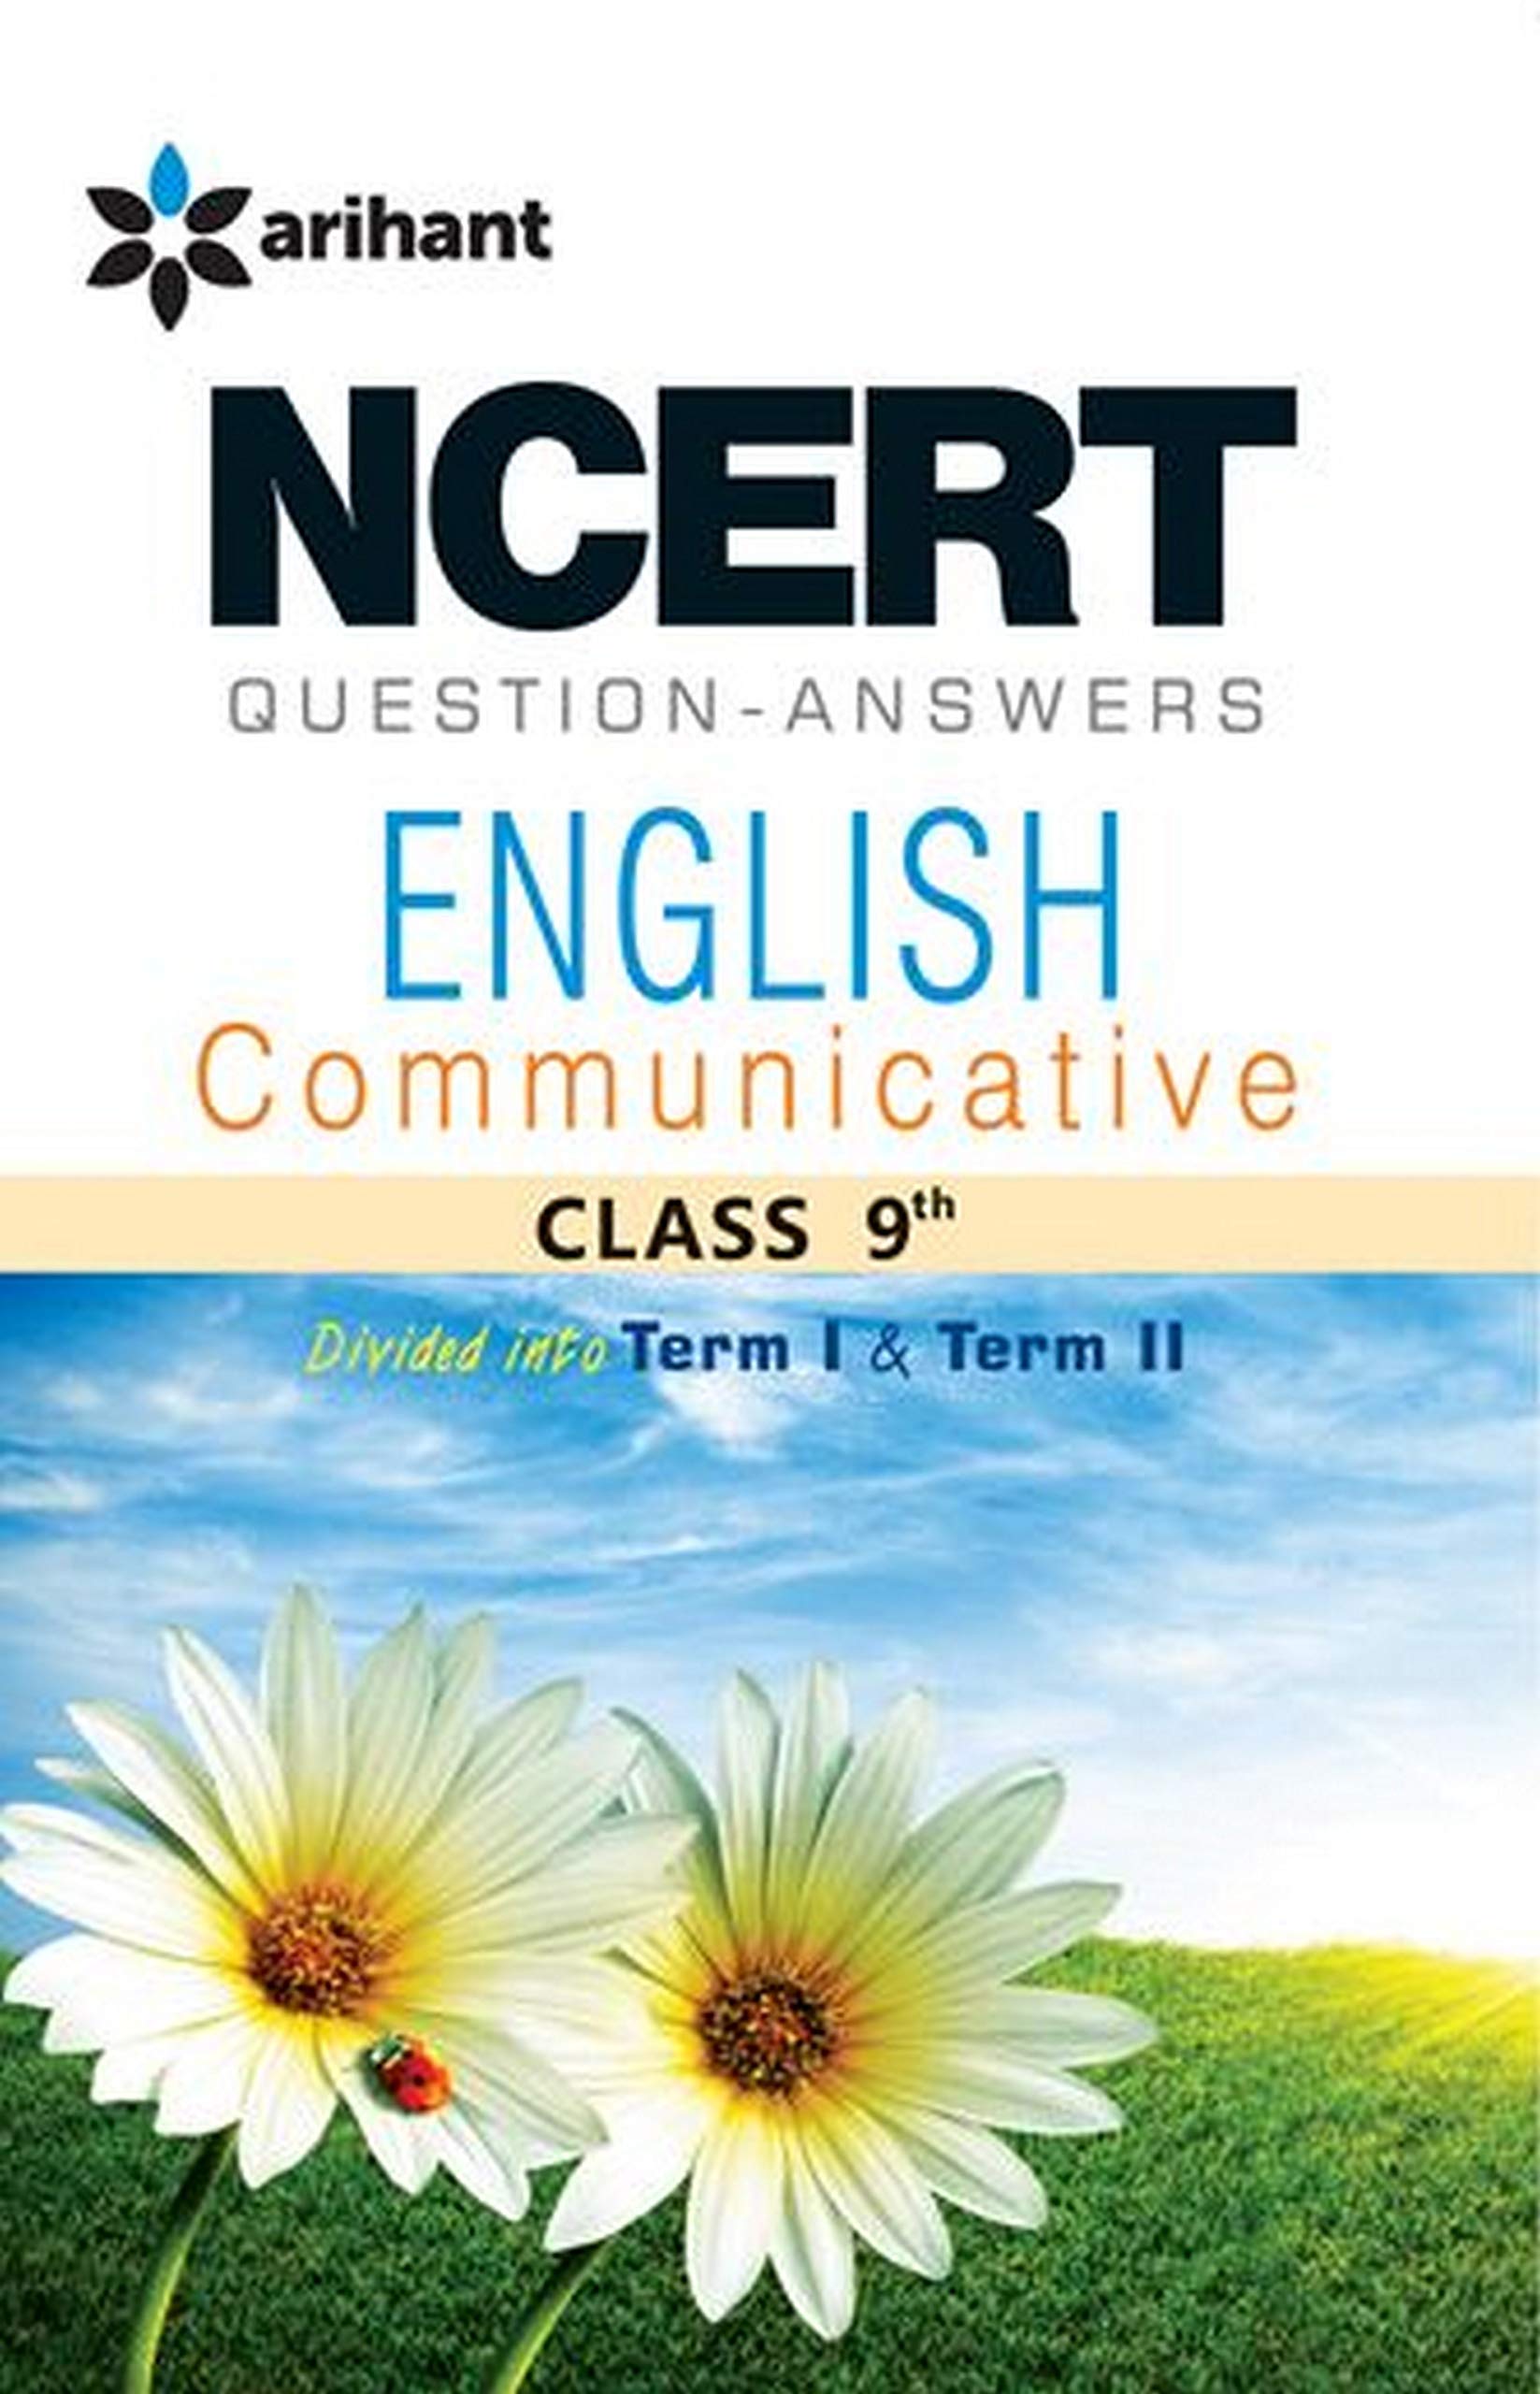 NCERT Questions-Answers - English Communicative for Class 9th